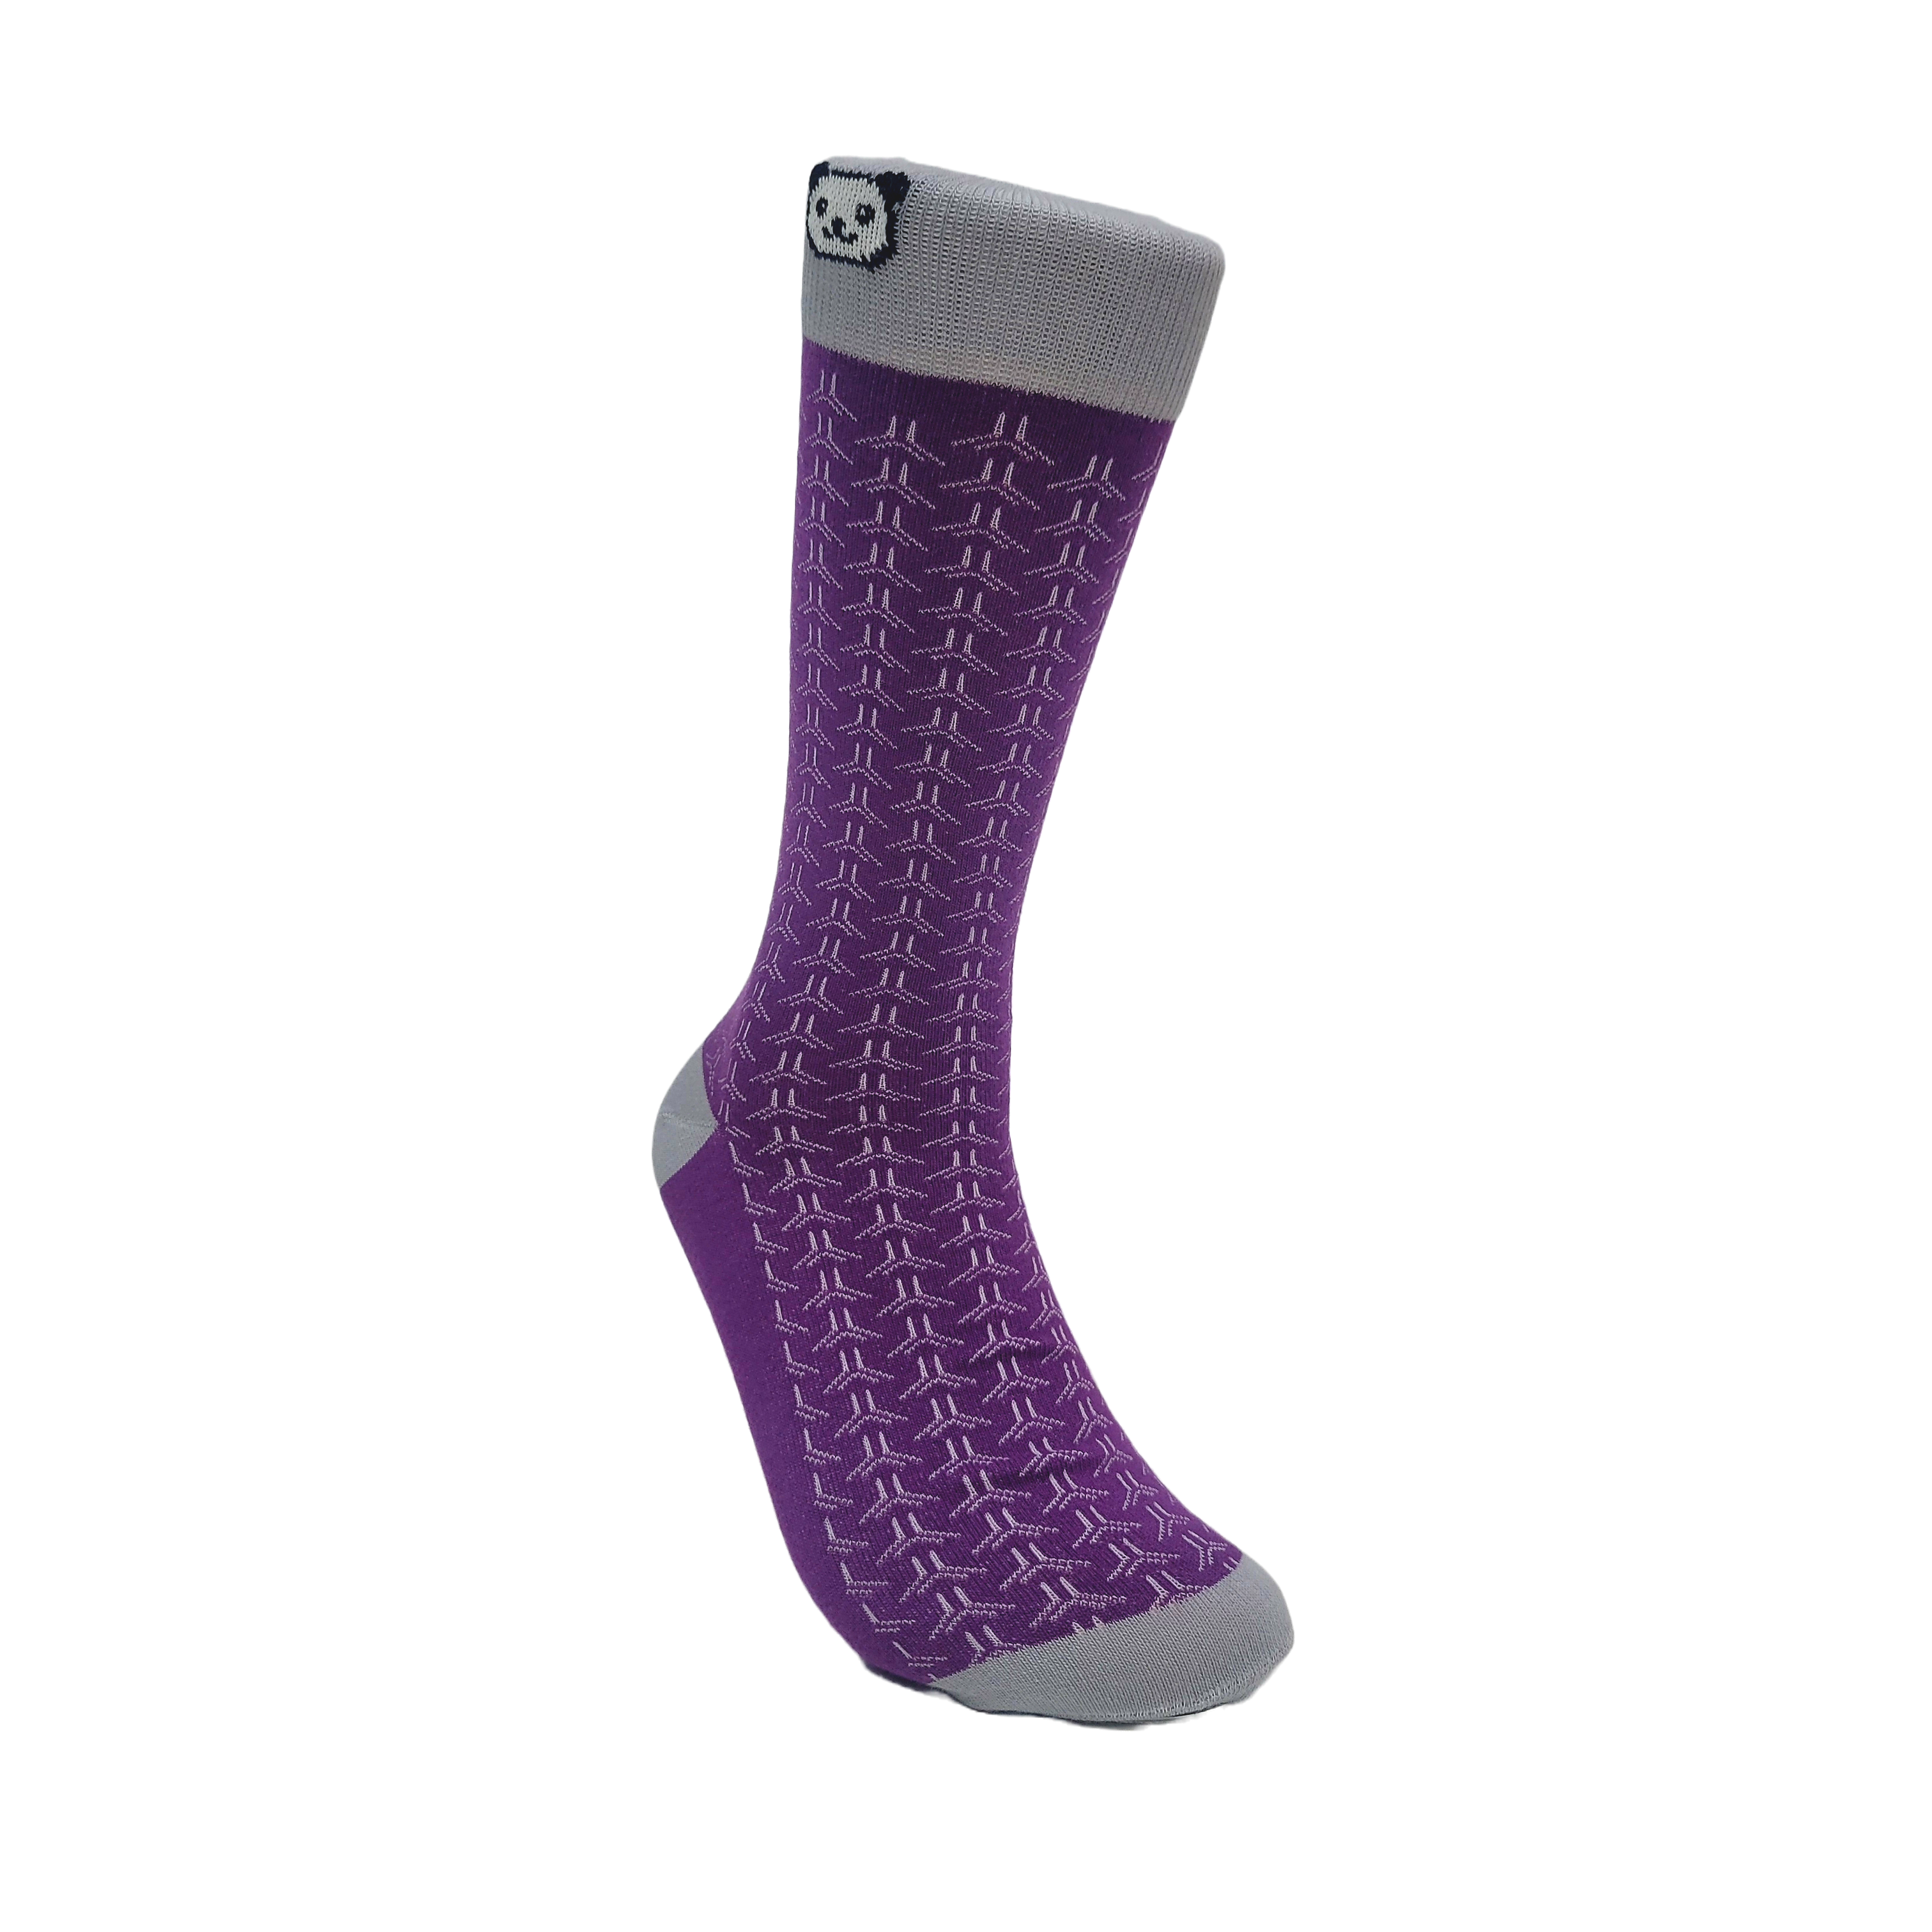 Purple and Gray Patterned Socks from the Sock Panda